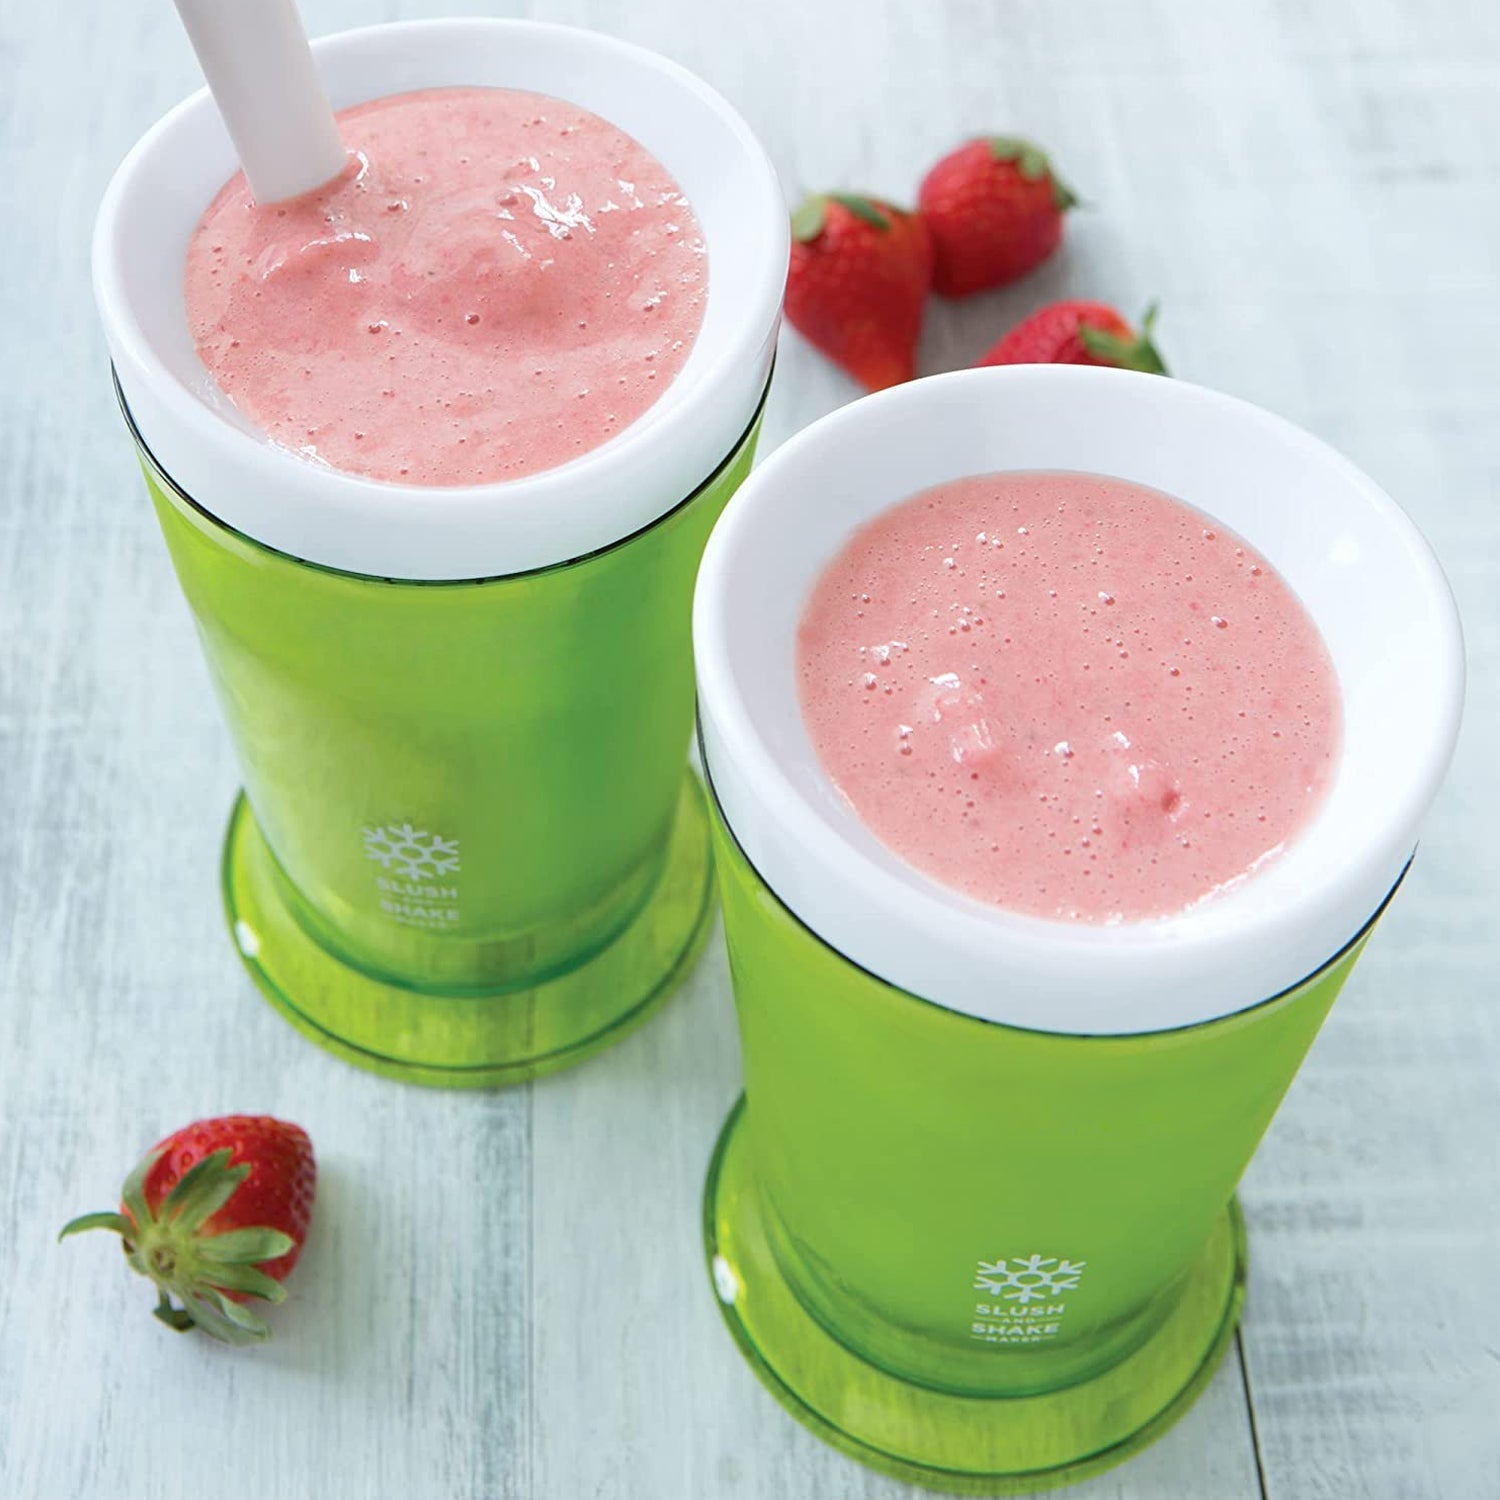 6820 Slush and Shake Maker, Compact Make and Serve Cup with Freezer Core Creates Single-serving Smoothies, Slushies and Milkshakes in Minutes, BPA-free, Gift Box. JK Trends